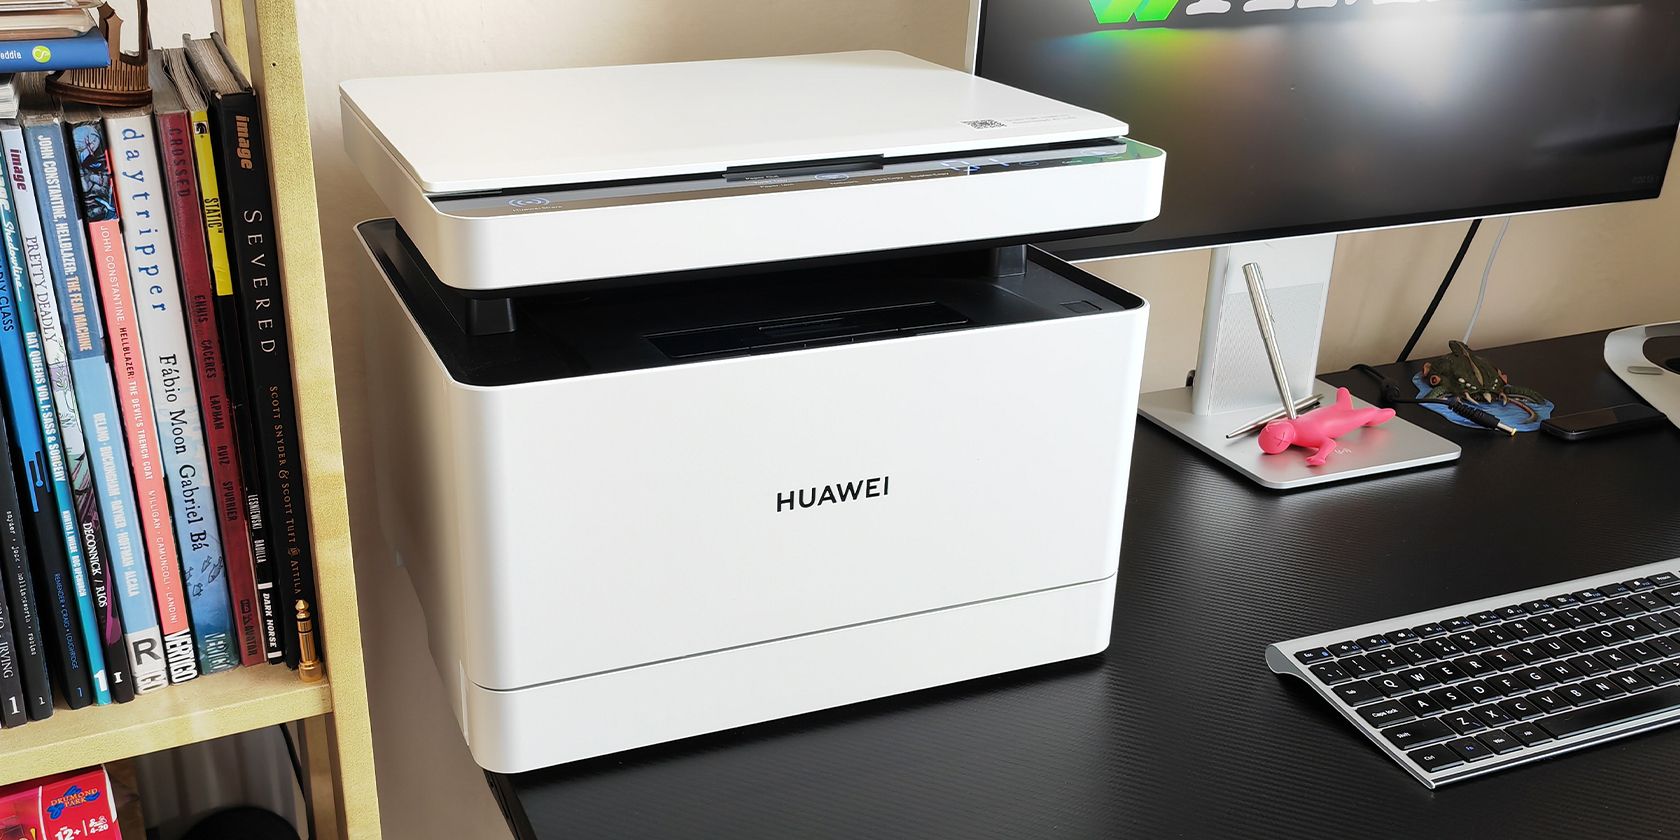 Huawei PixLab X1: The Home Office Want to Smash